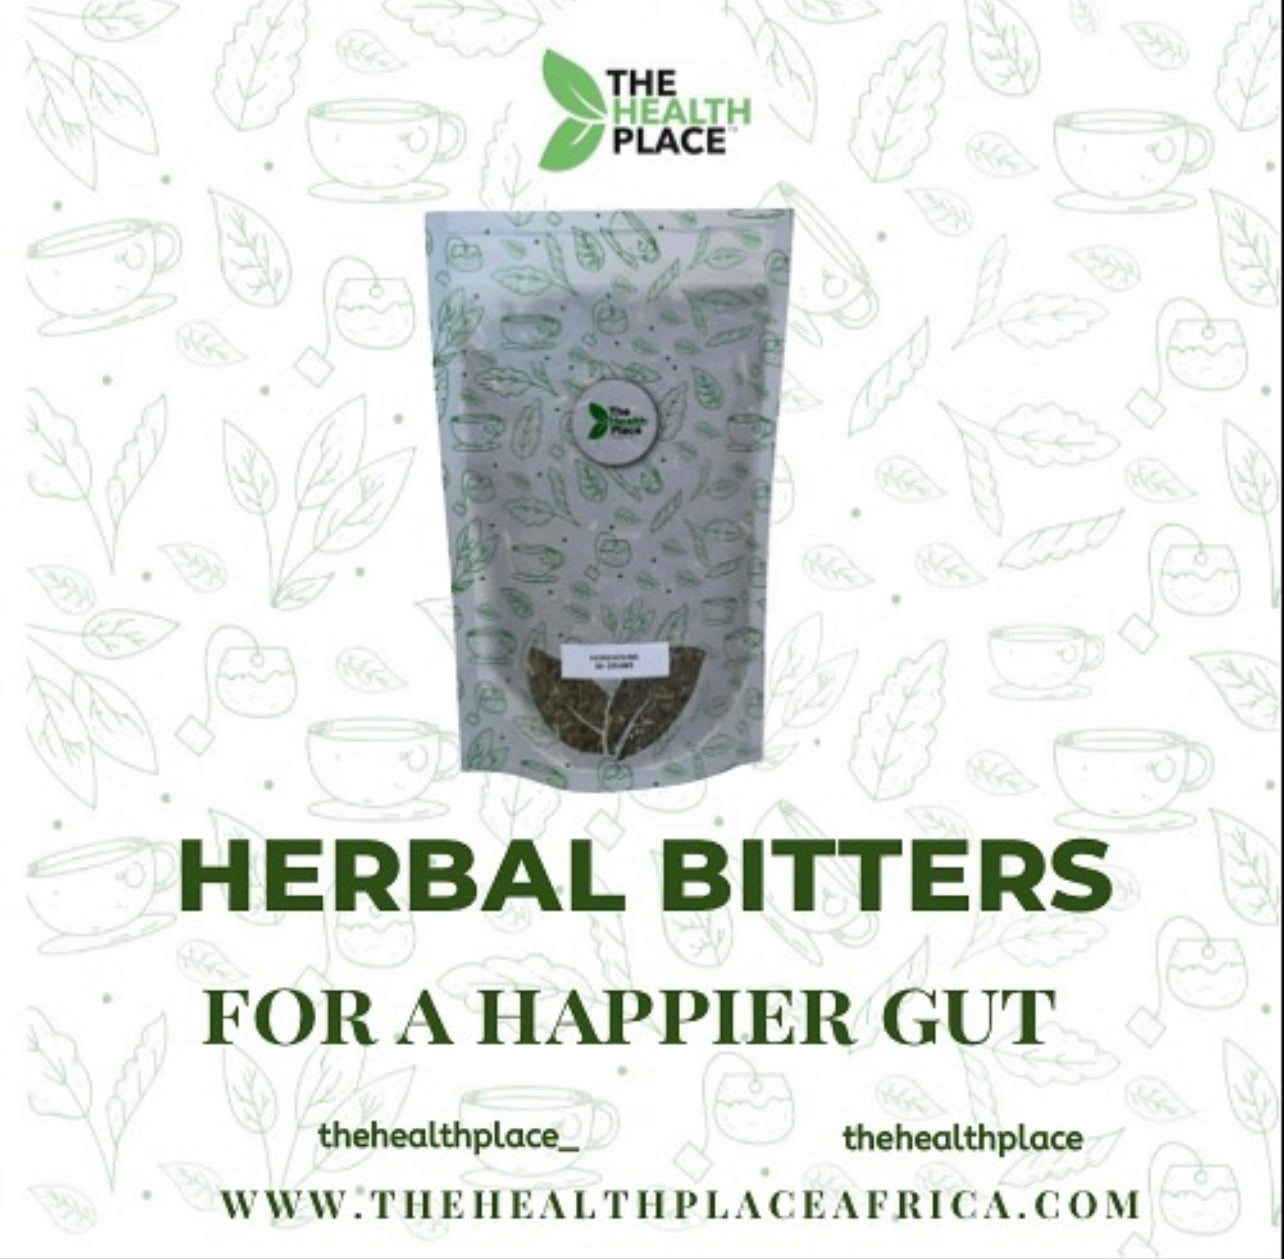 HERBAL BITTERS FOR A HAPPIER GUT